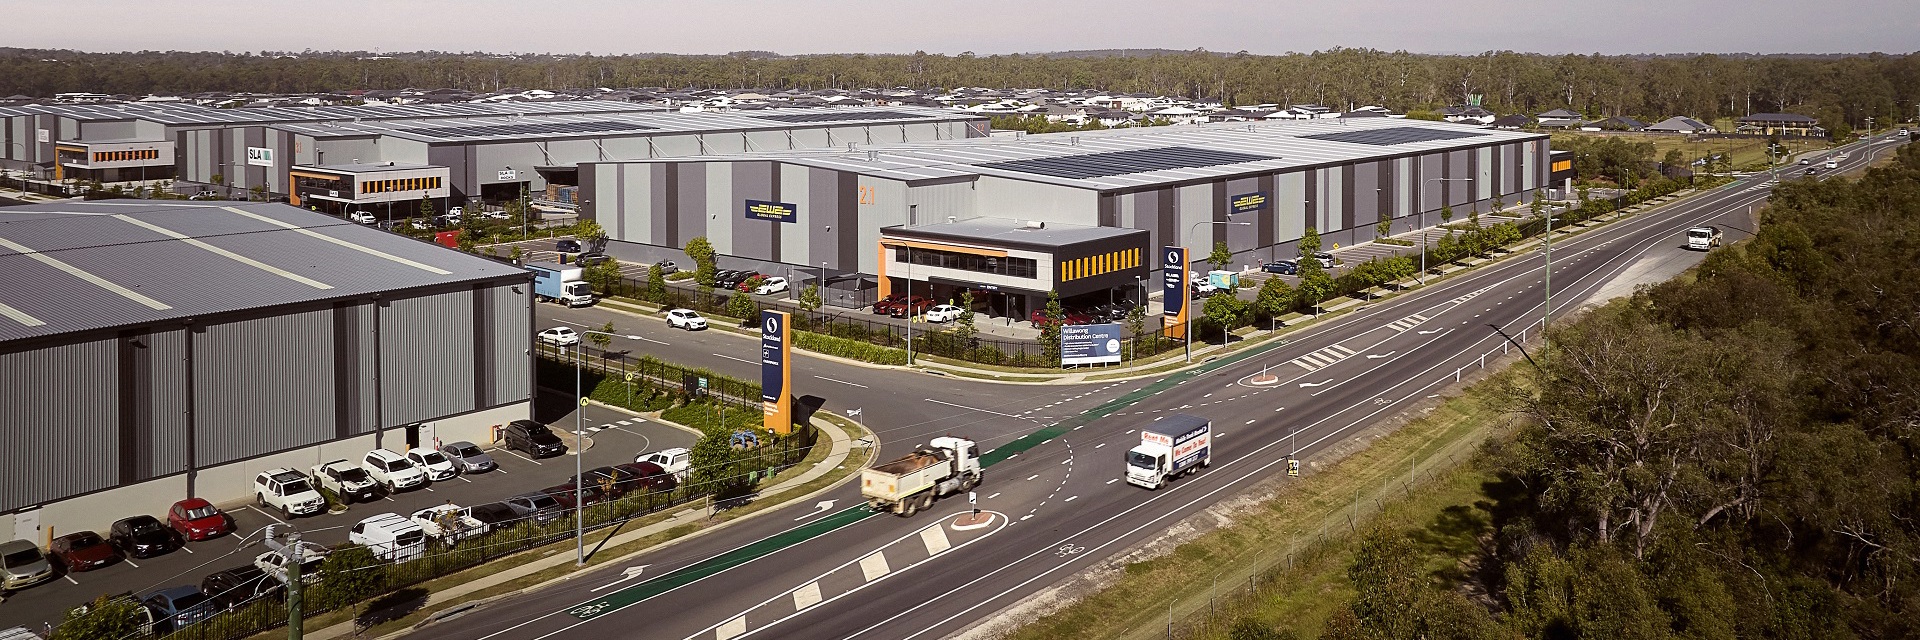 Willawong distribution centre aerial street view